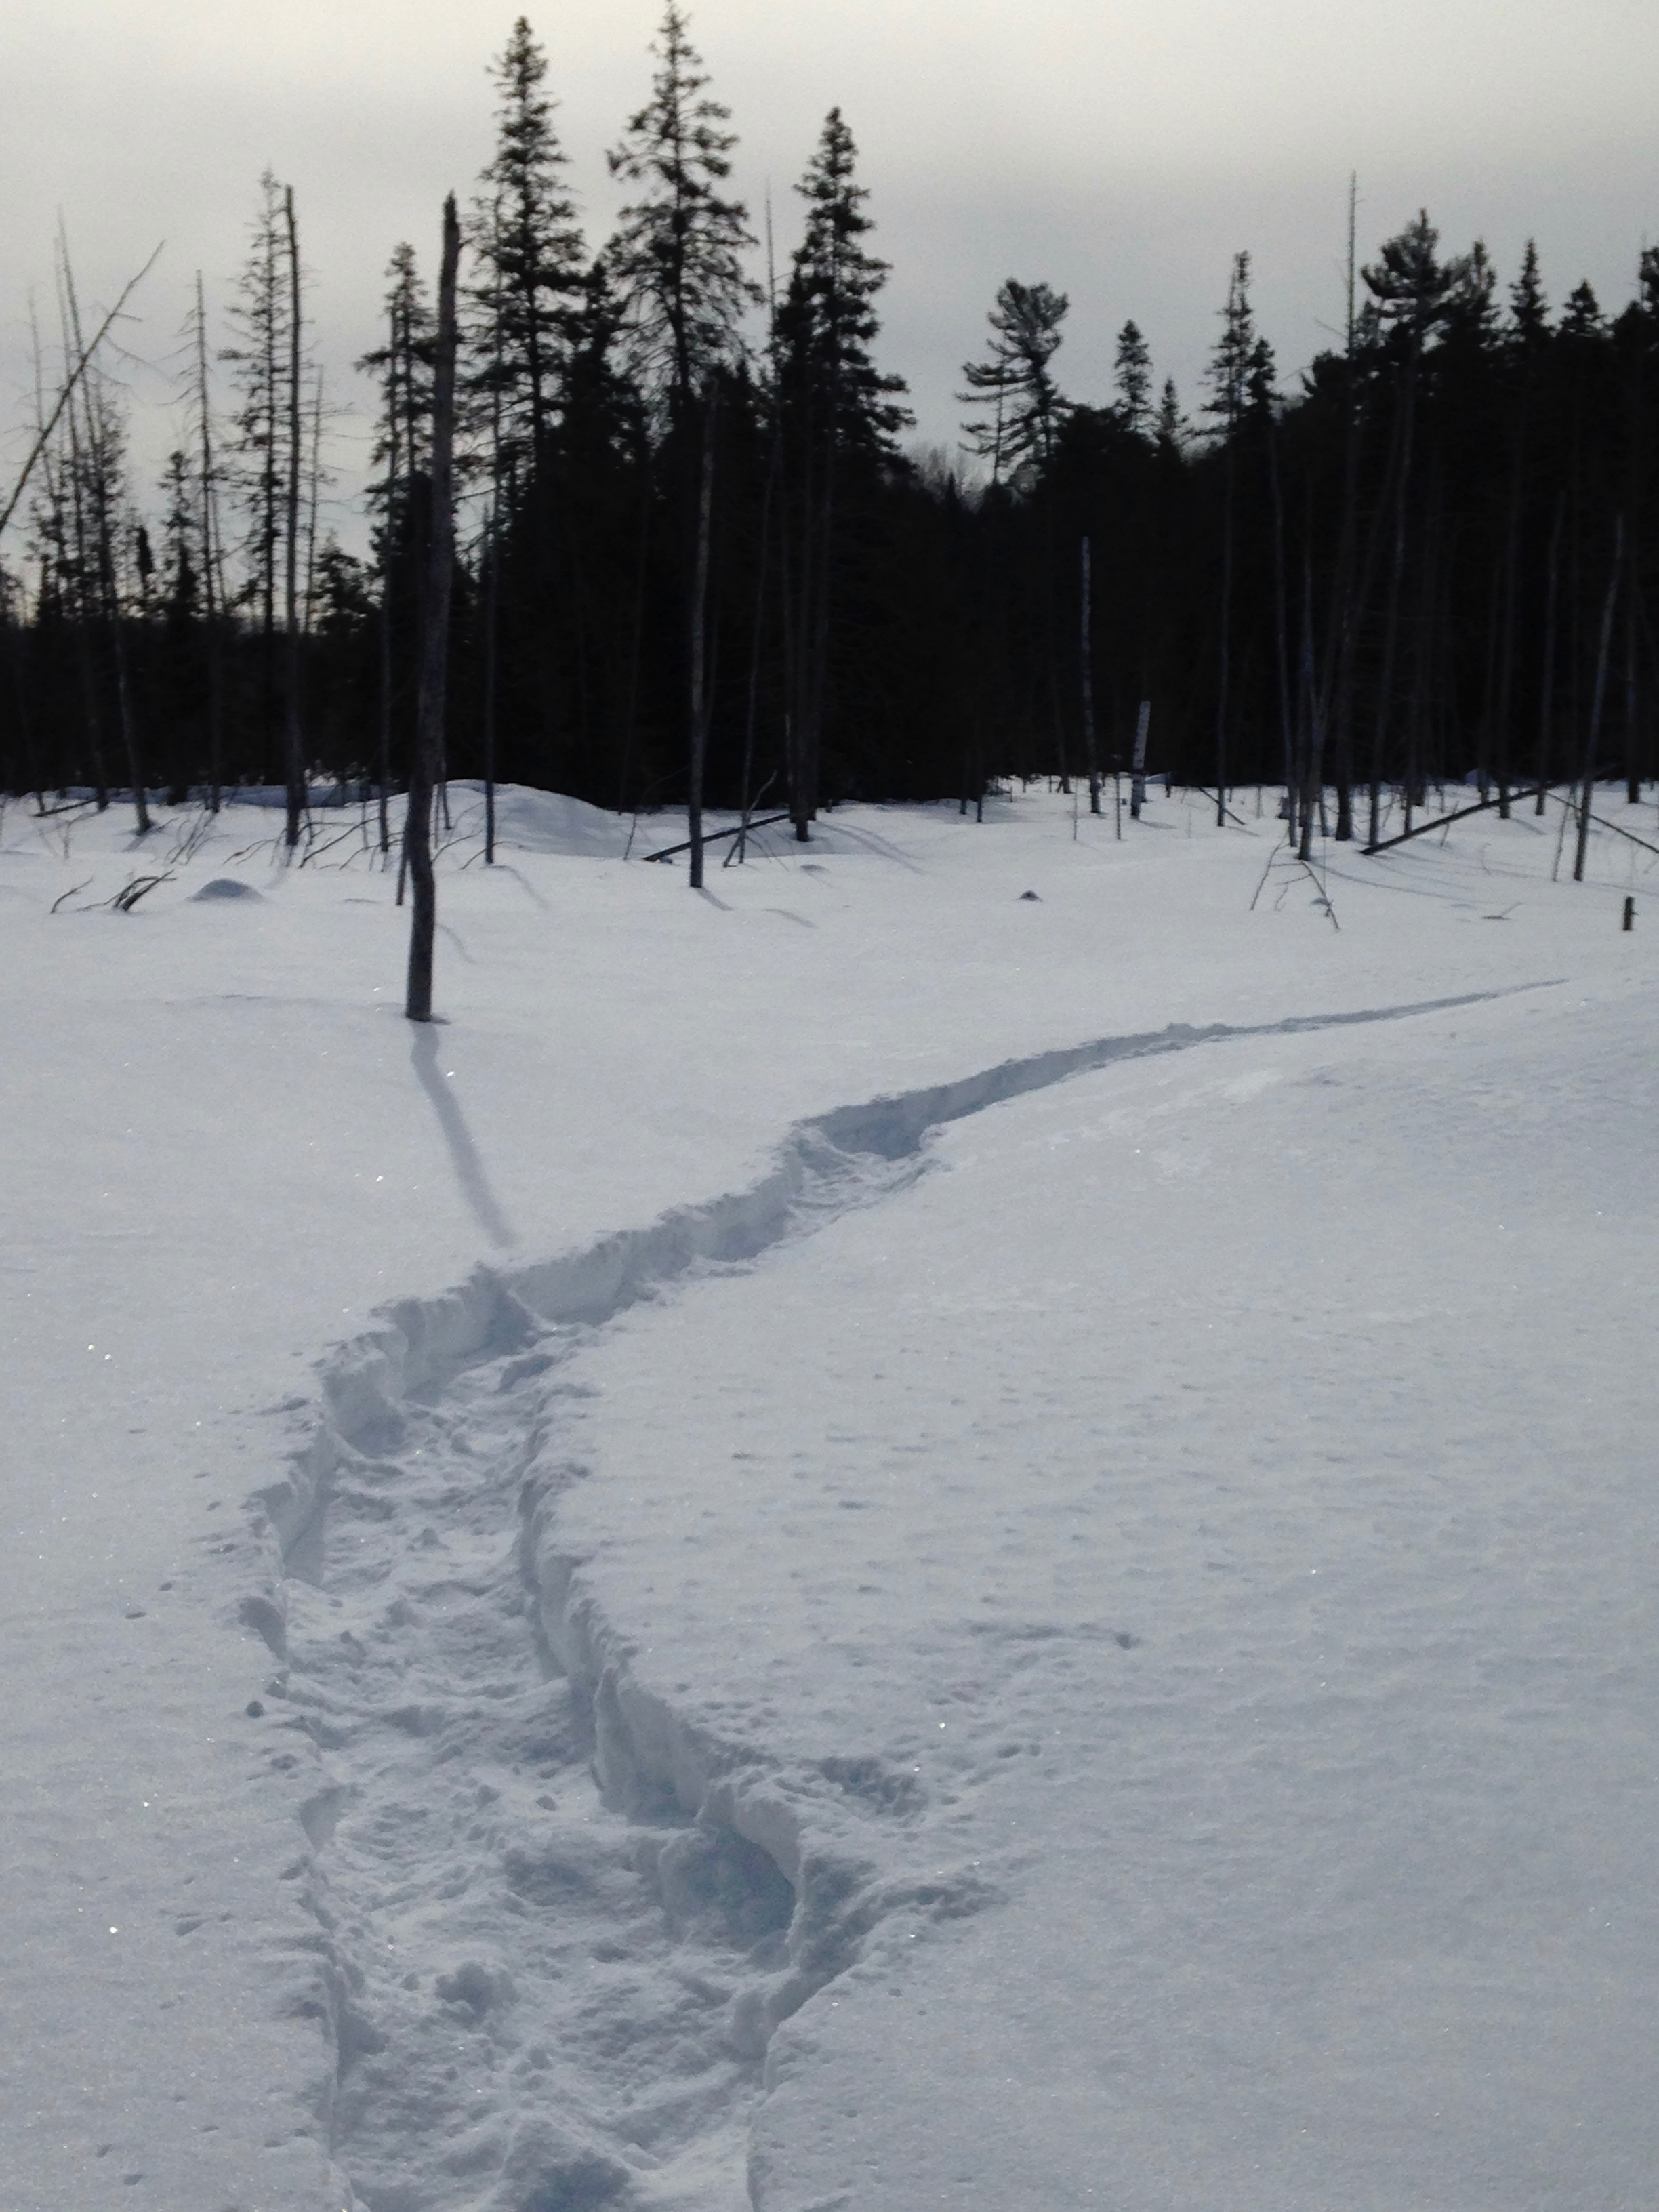 Make Tracks on Our Extensive Snowshoe Trail Network